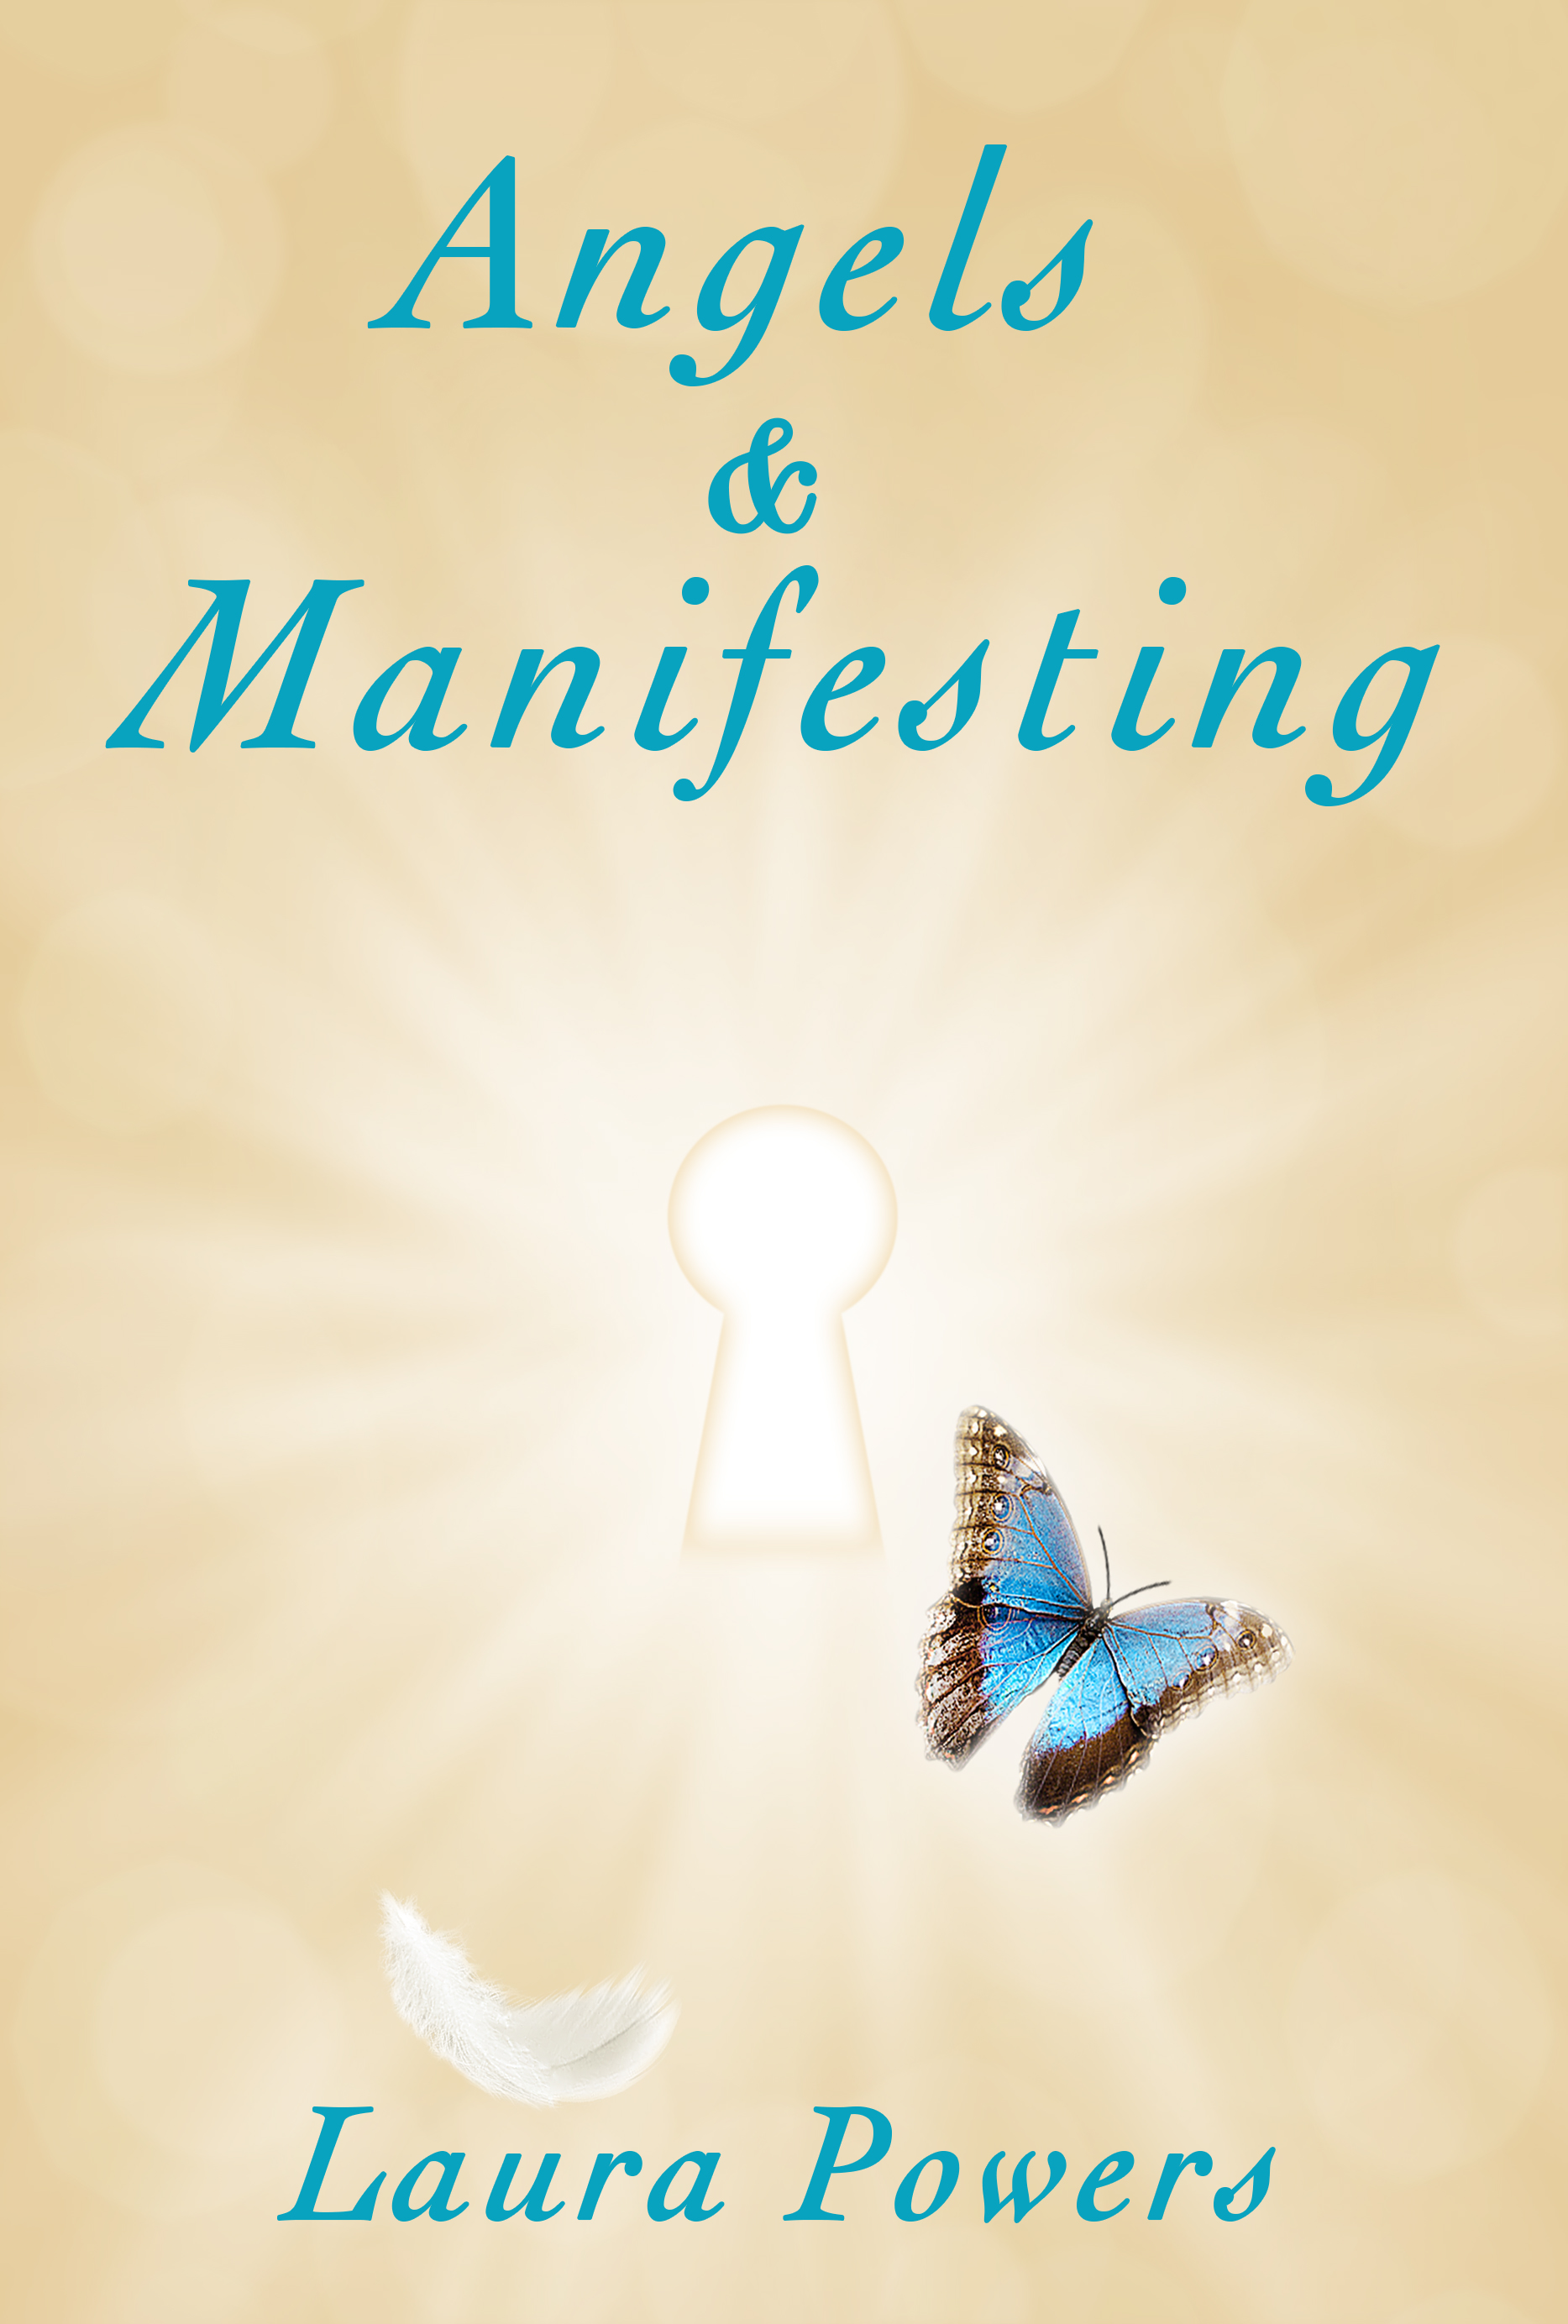 Angels and Manifesting